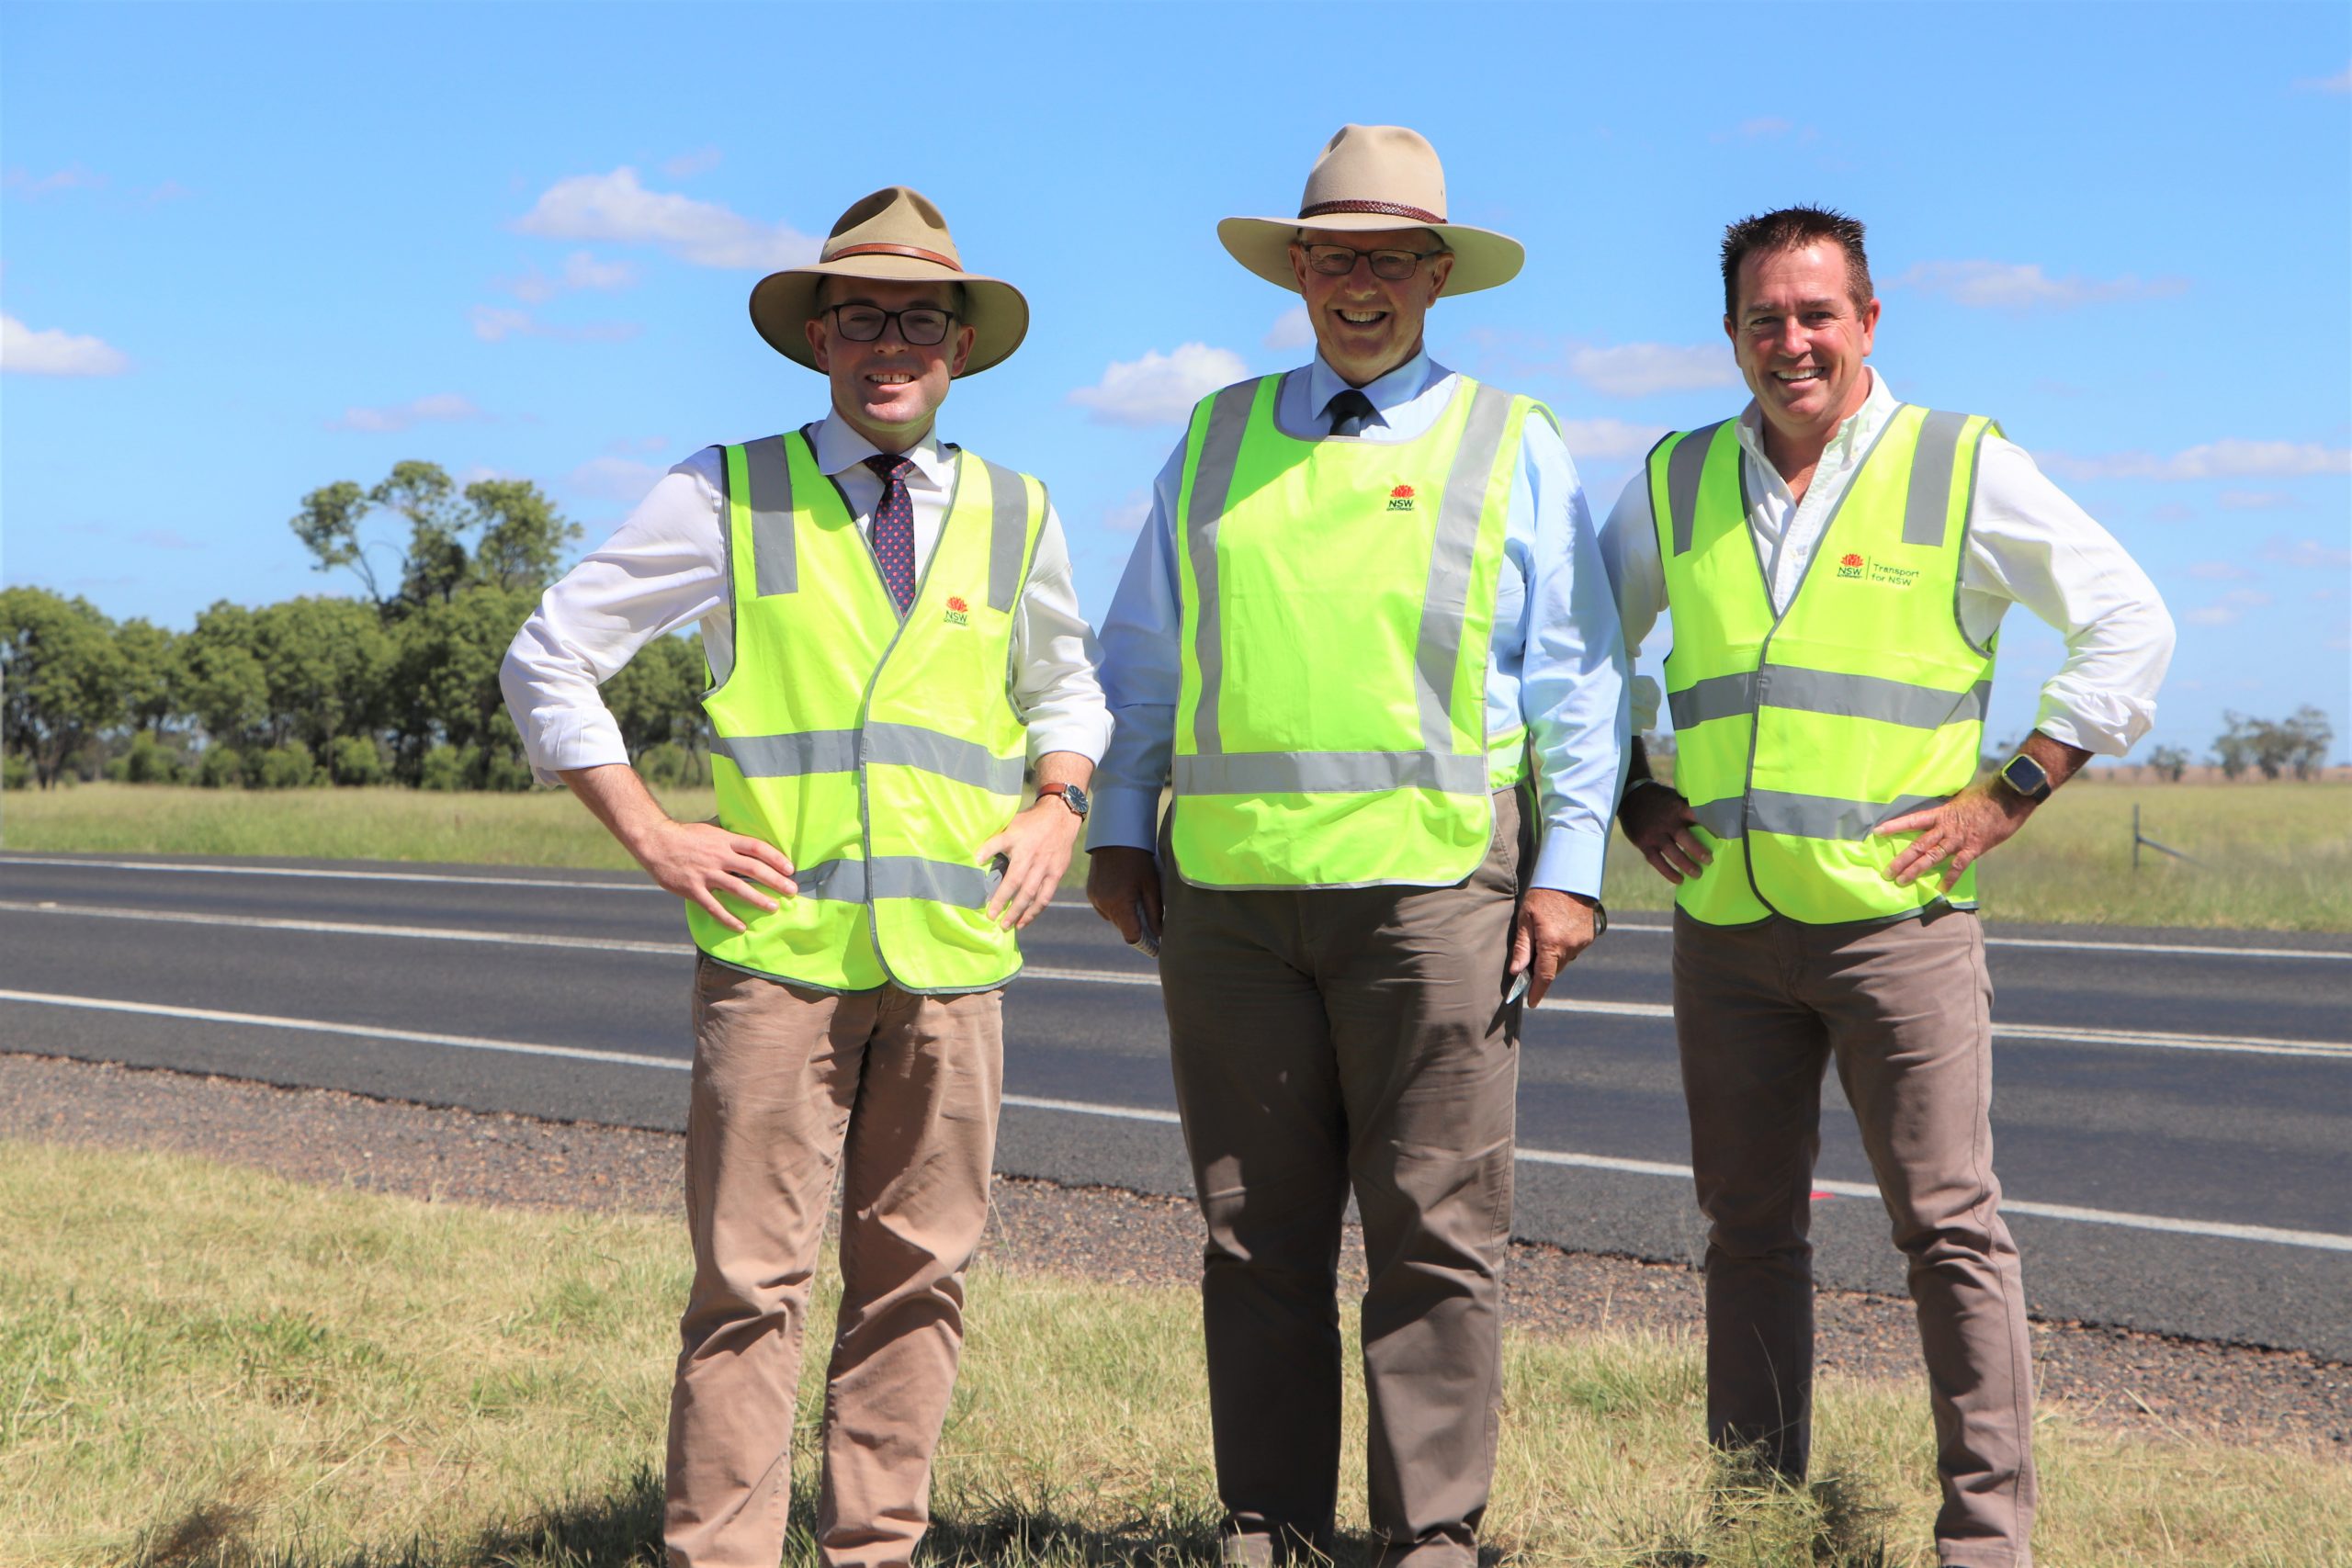 More jobs, better roads for North West NSW – Mark Coulton MP